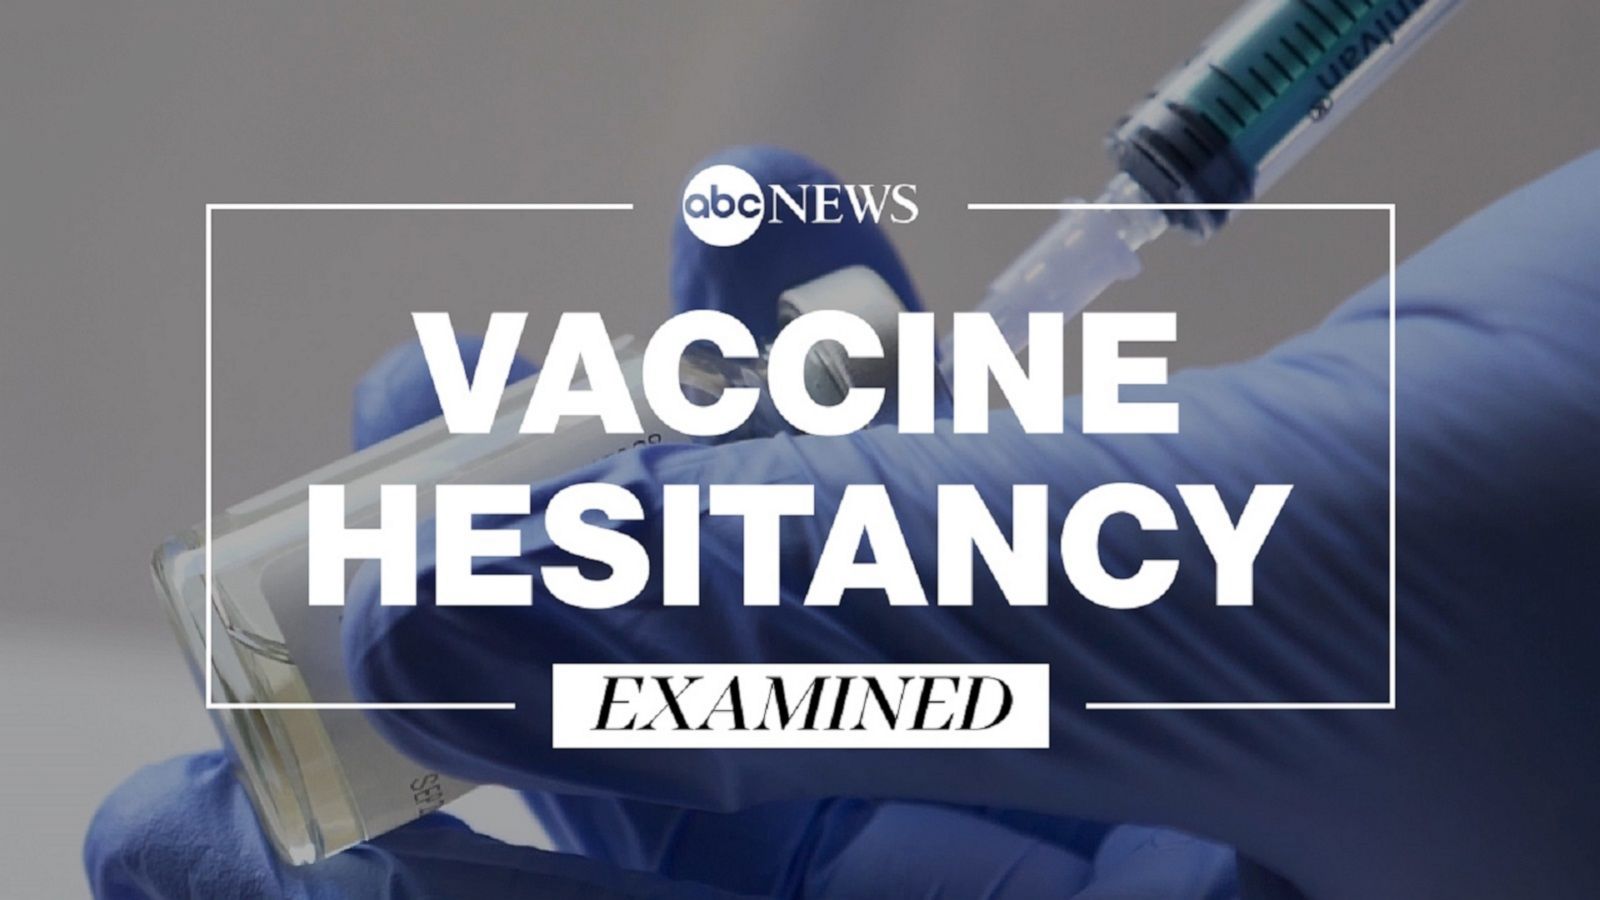 Why are people hesitant to trust a COVID-19 vaccine?